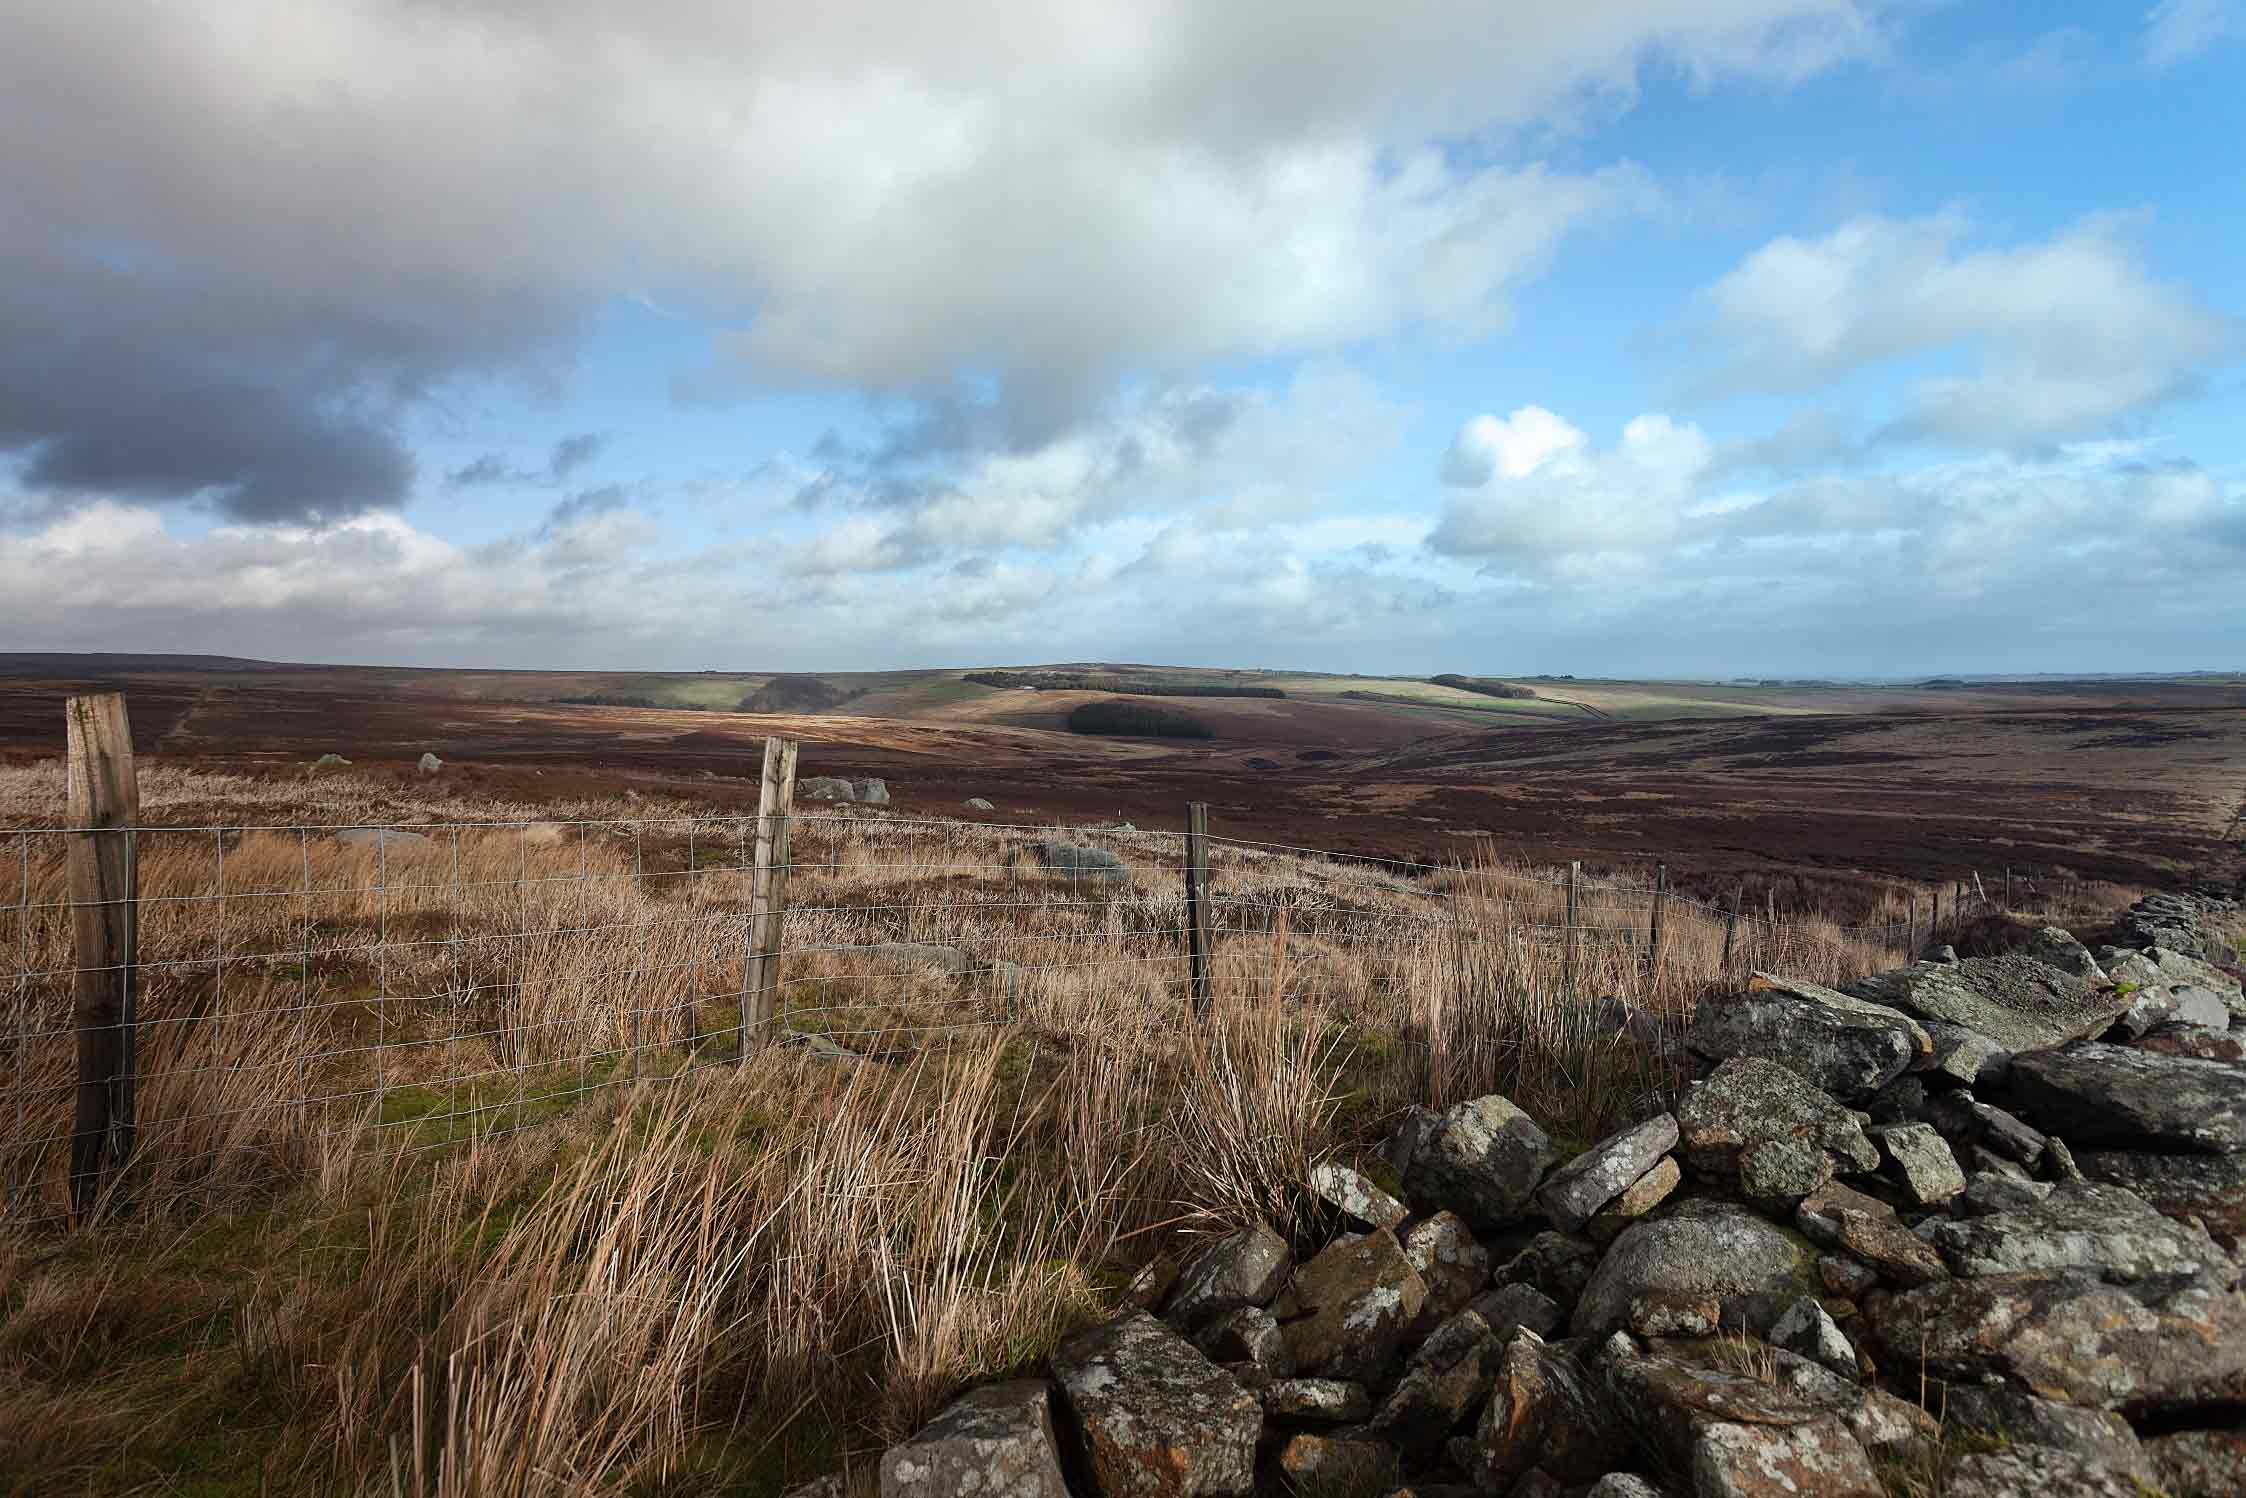 humberstone-bank-farm-covers-900-hectares-of-stunning-nidderdale%09-countryside